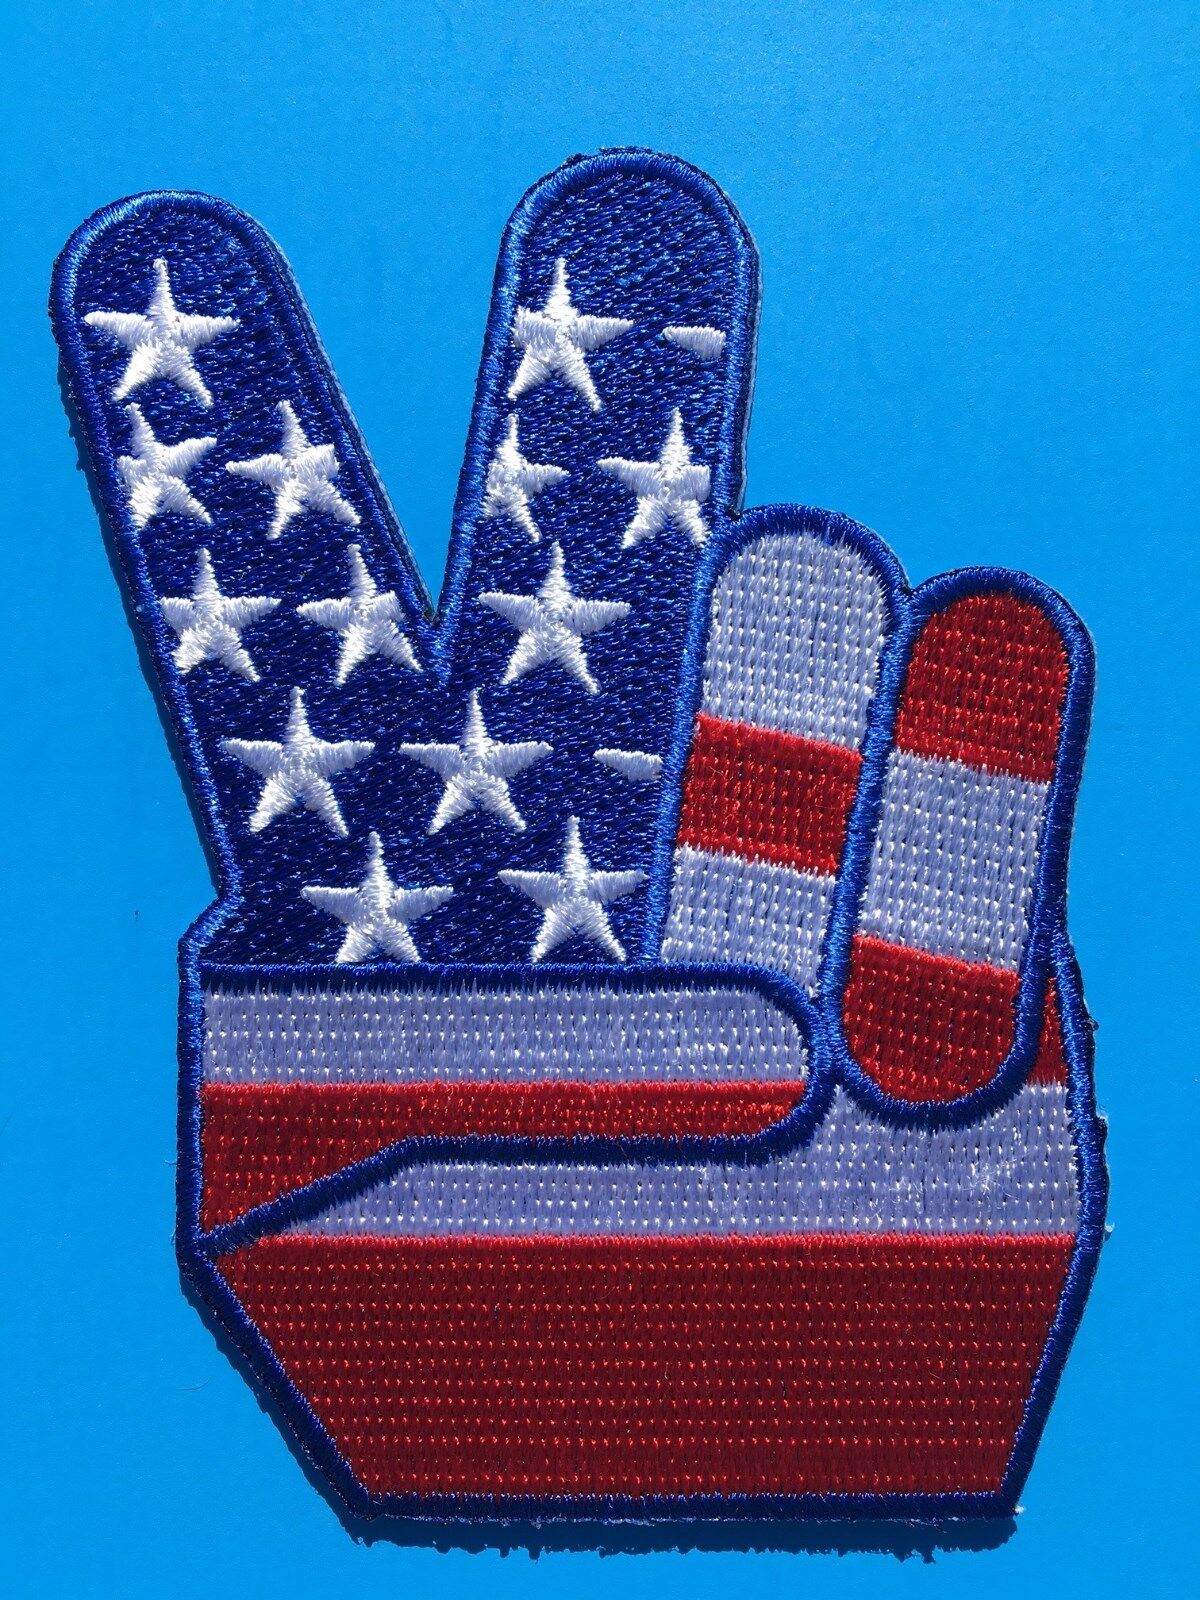 USA AMERICAN FLAG PEACE SIGN “V FOR VICTORY” EMBROIDERED PATCH (3.5